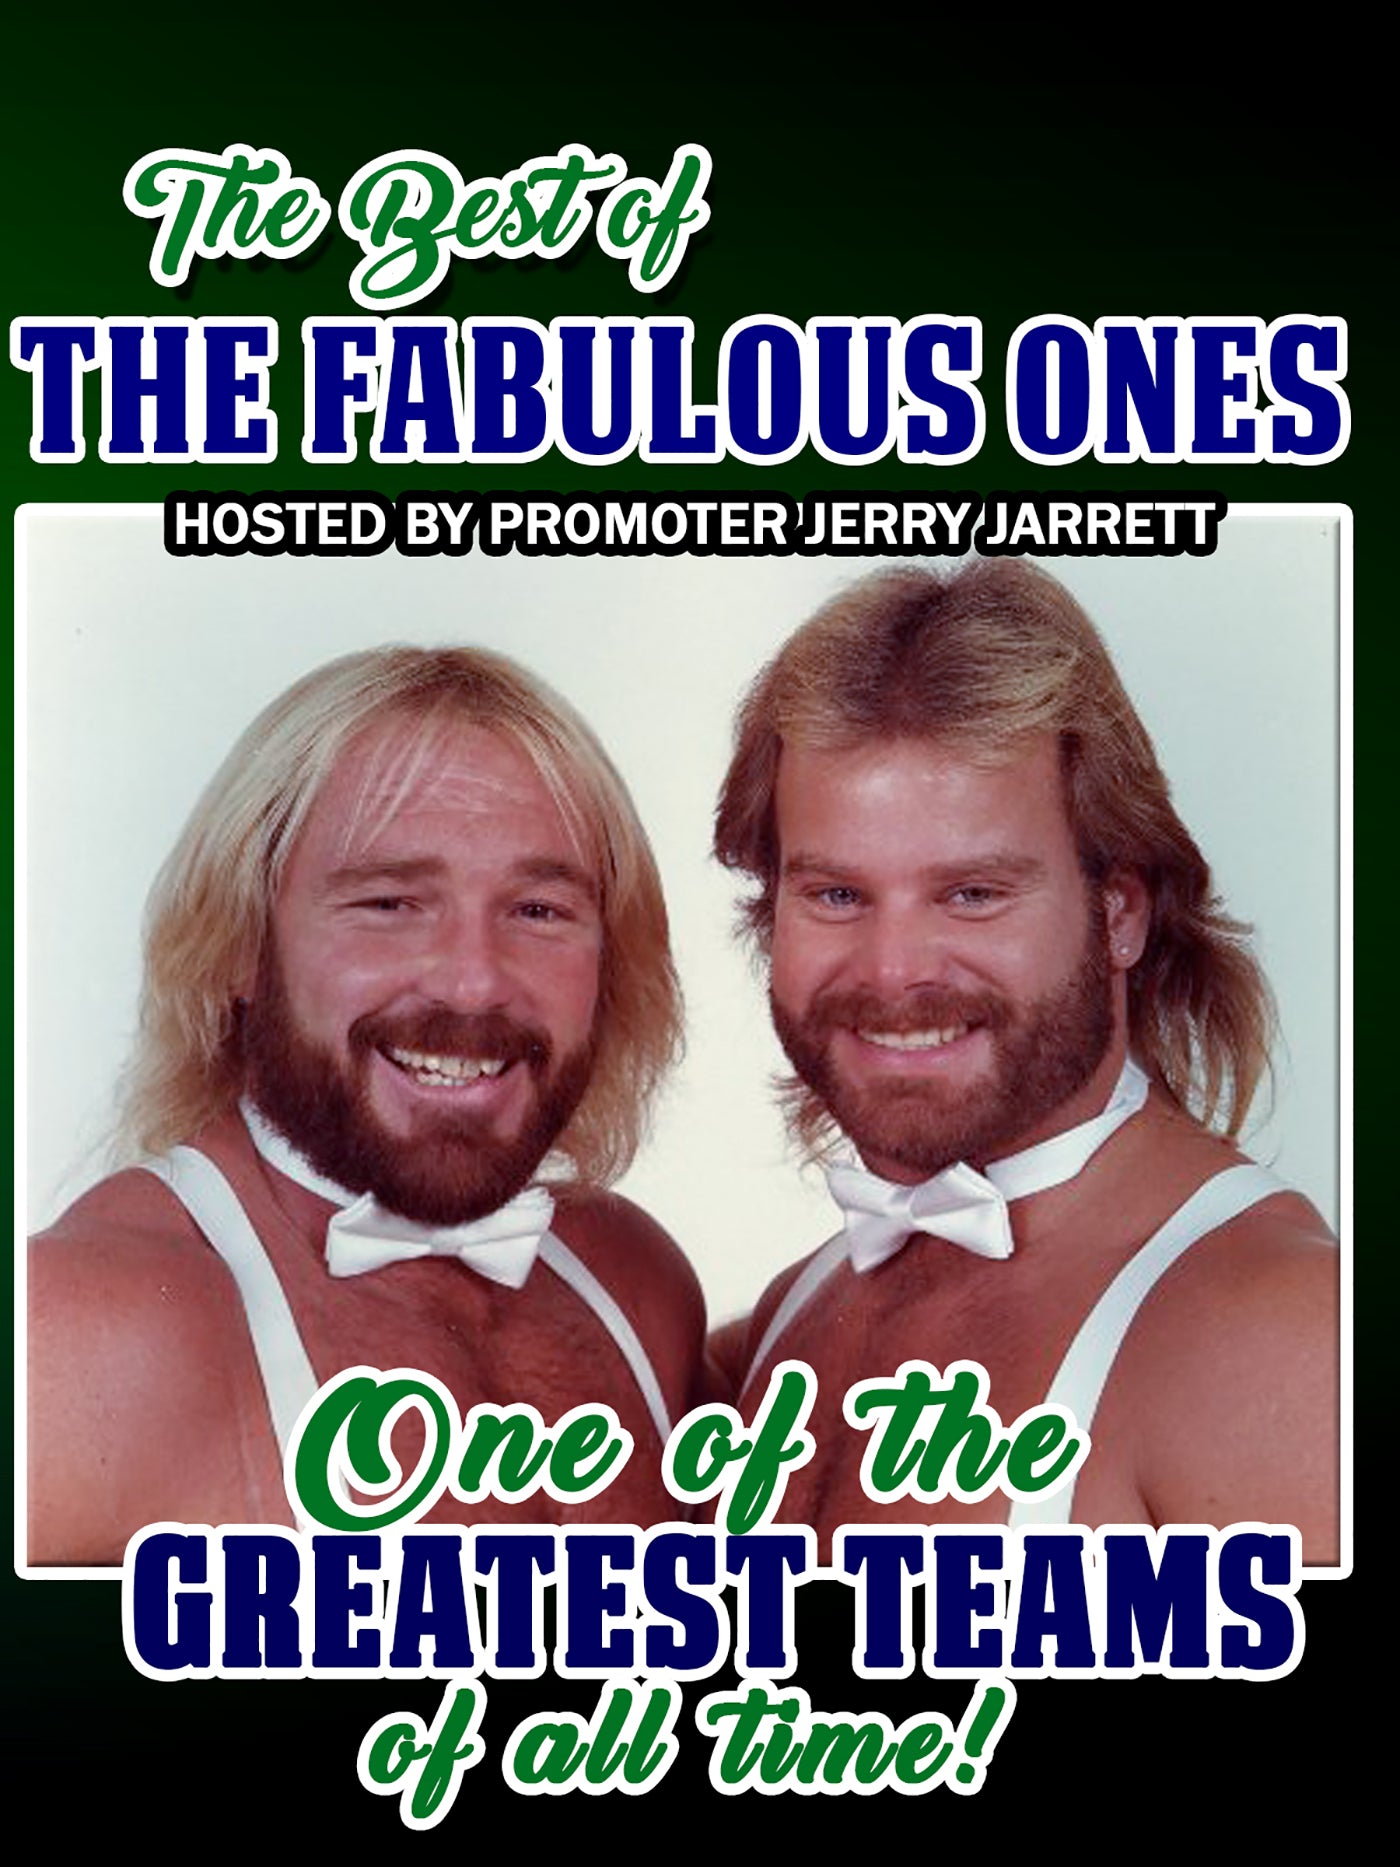 Fabulous Ones, The - Best Of The Fabulous Ones Vol 1 cover art